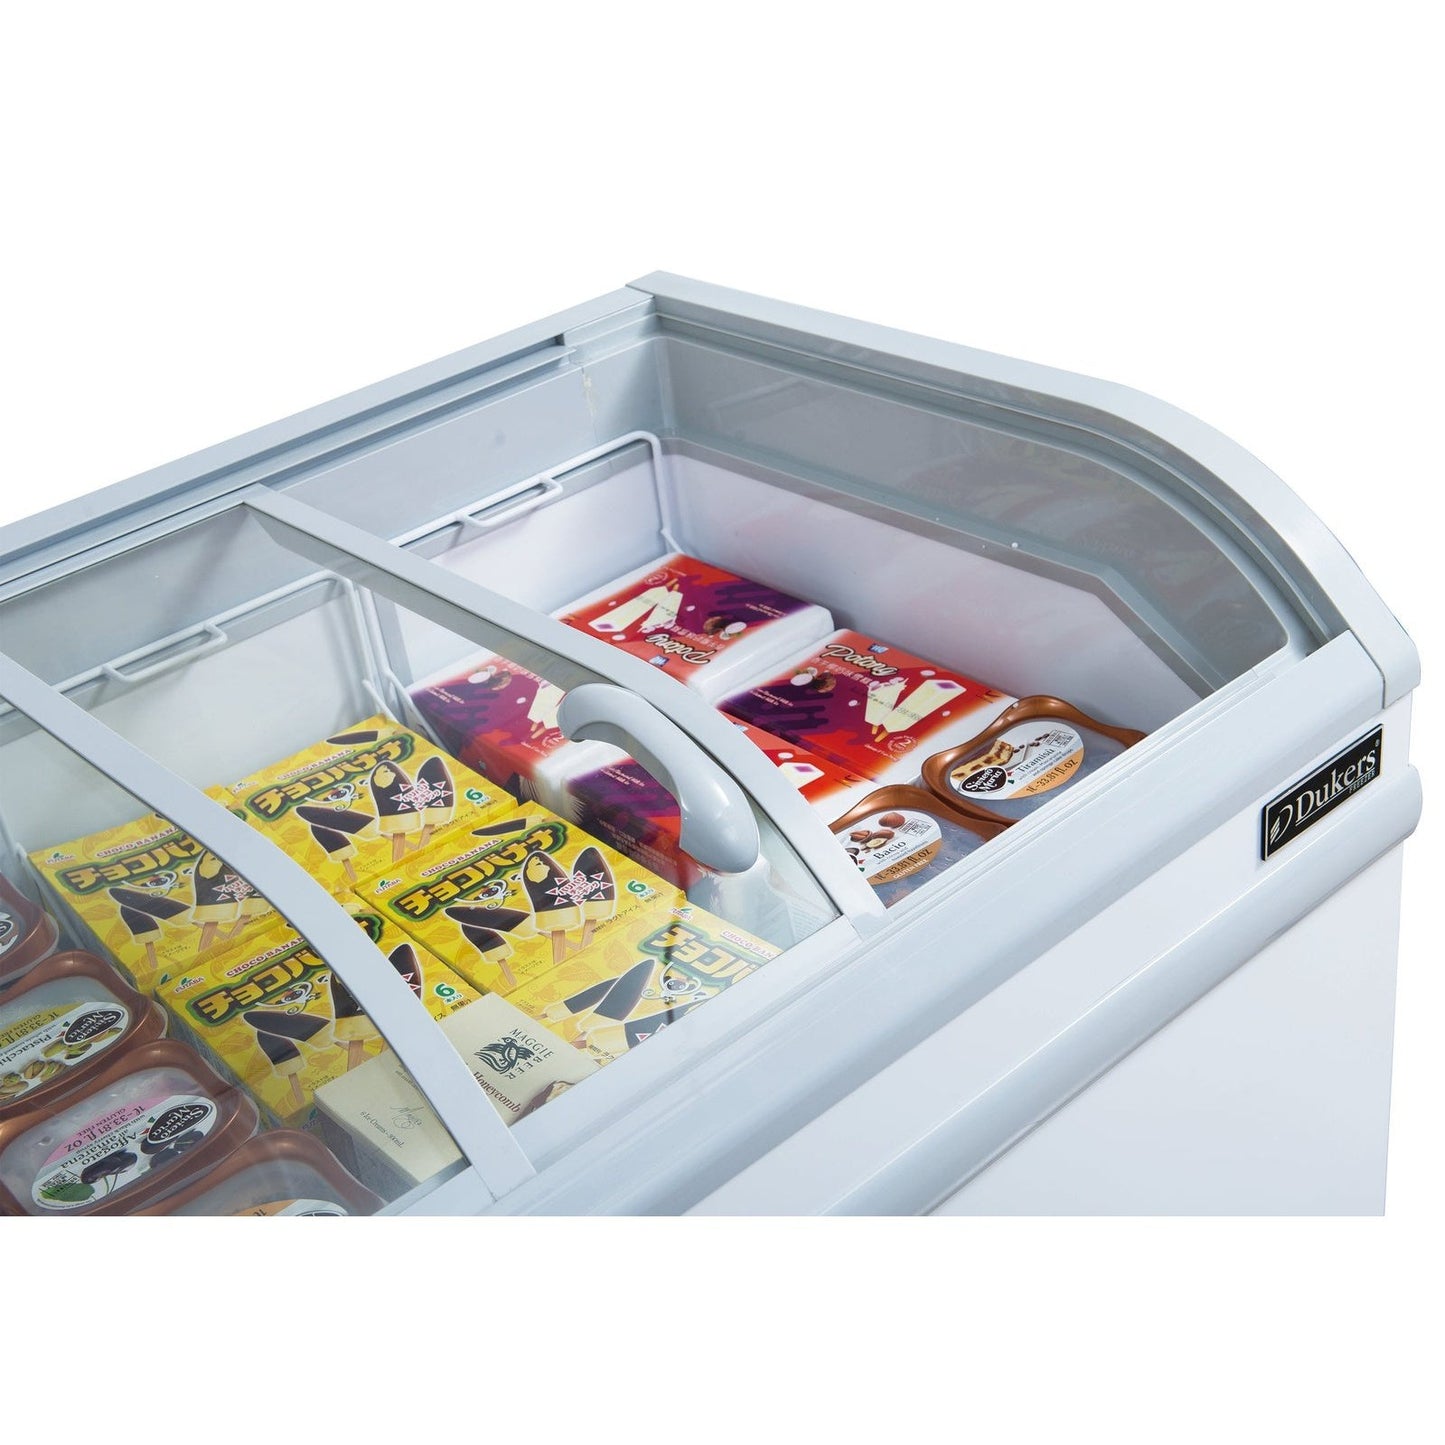 Dukers WD-500Y Commercial Chest Freezer